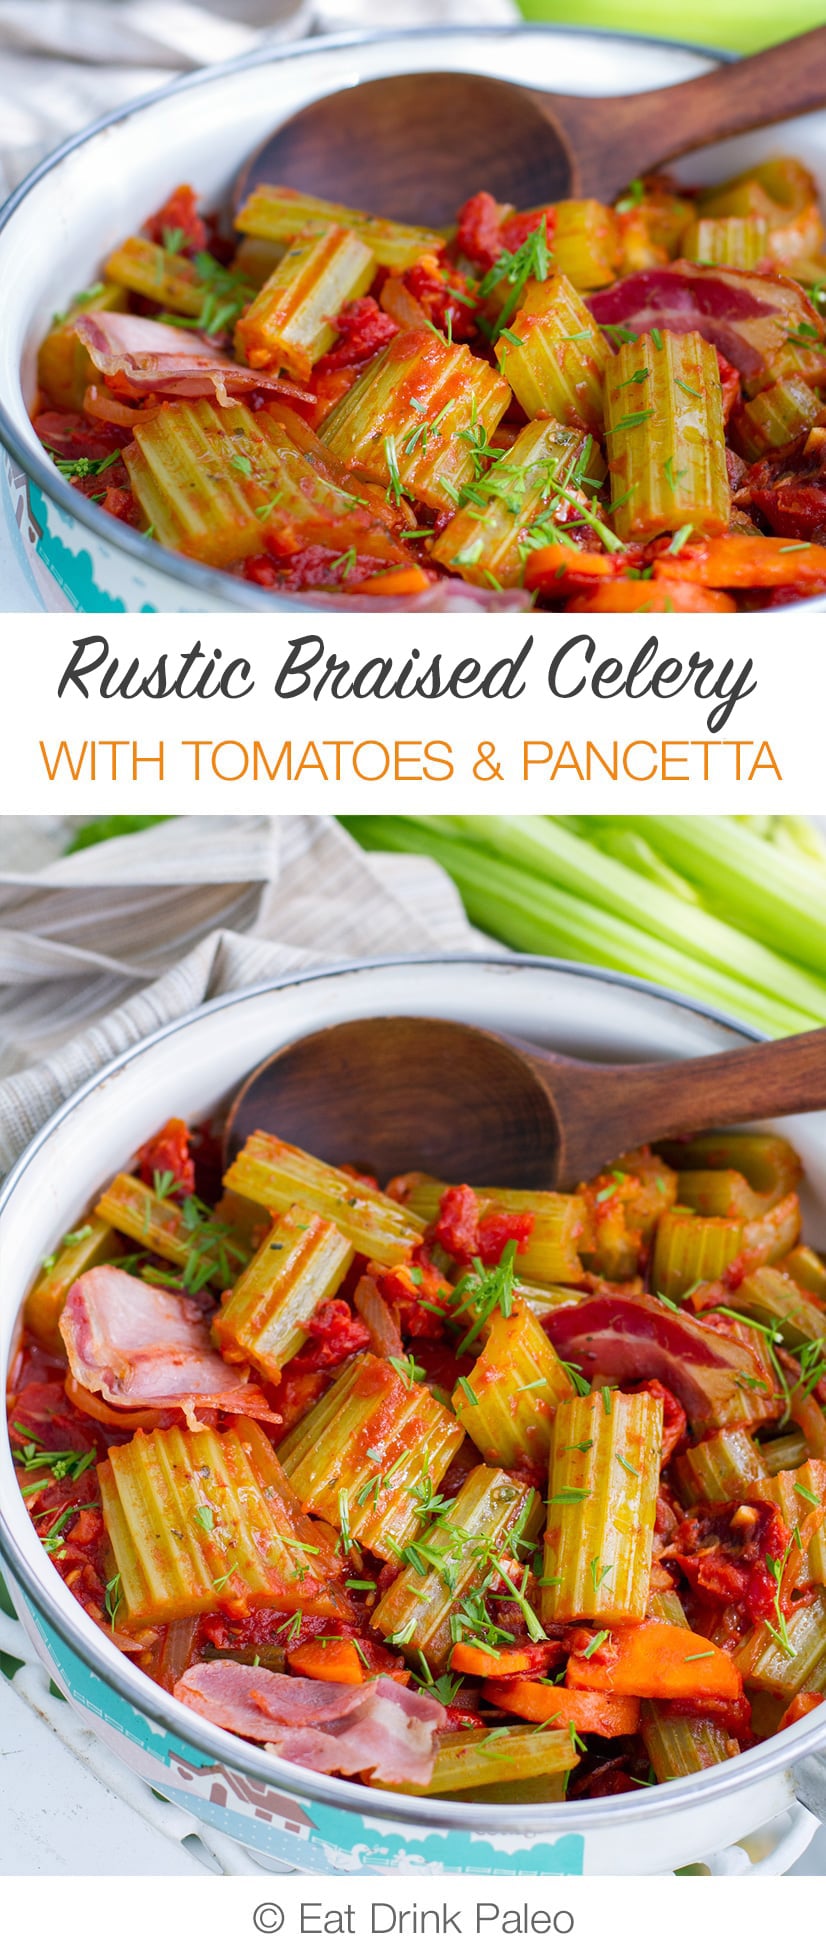 Rustic Braised Celery With Pancetta & Tomatoes (Paleo, Whole30, Gluten-free, Low-Carb)